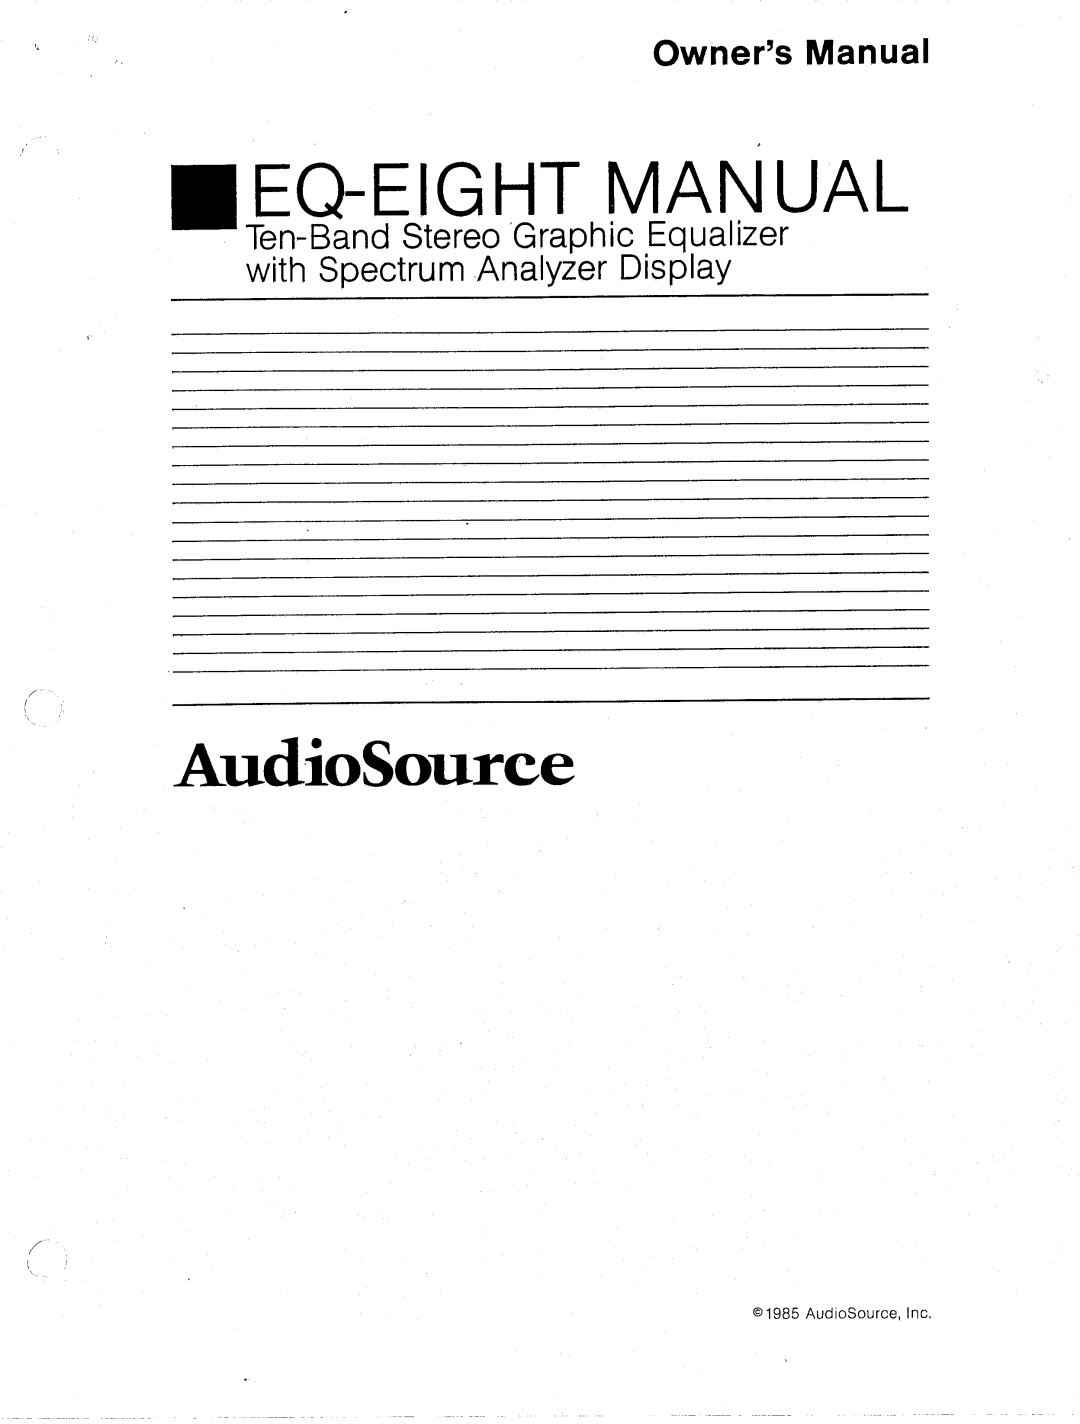 AudioSource AudioSource EQ 200 10-Band Stereo Graphic Equalizer manual 